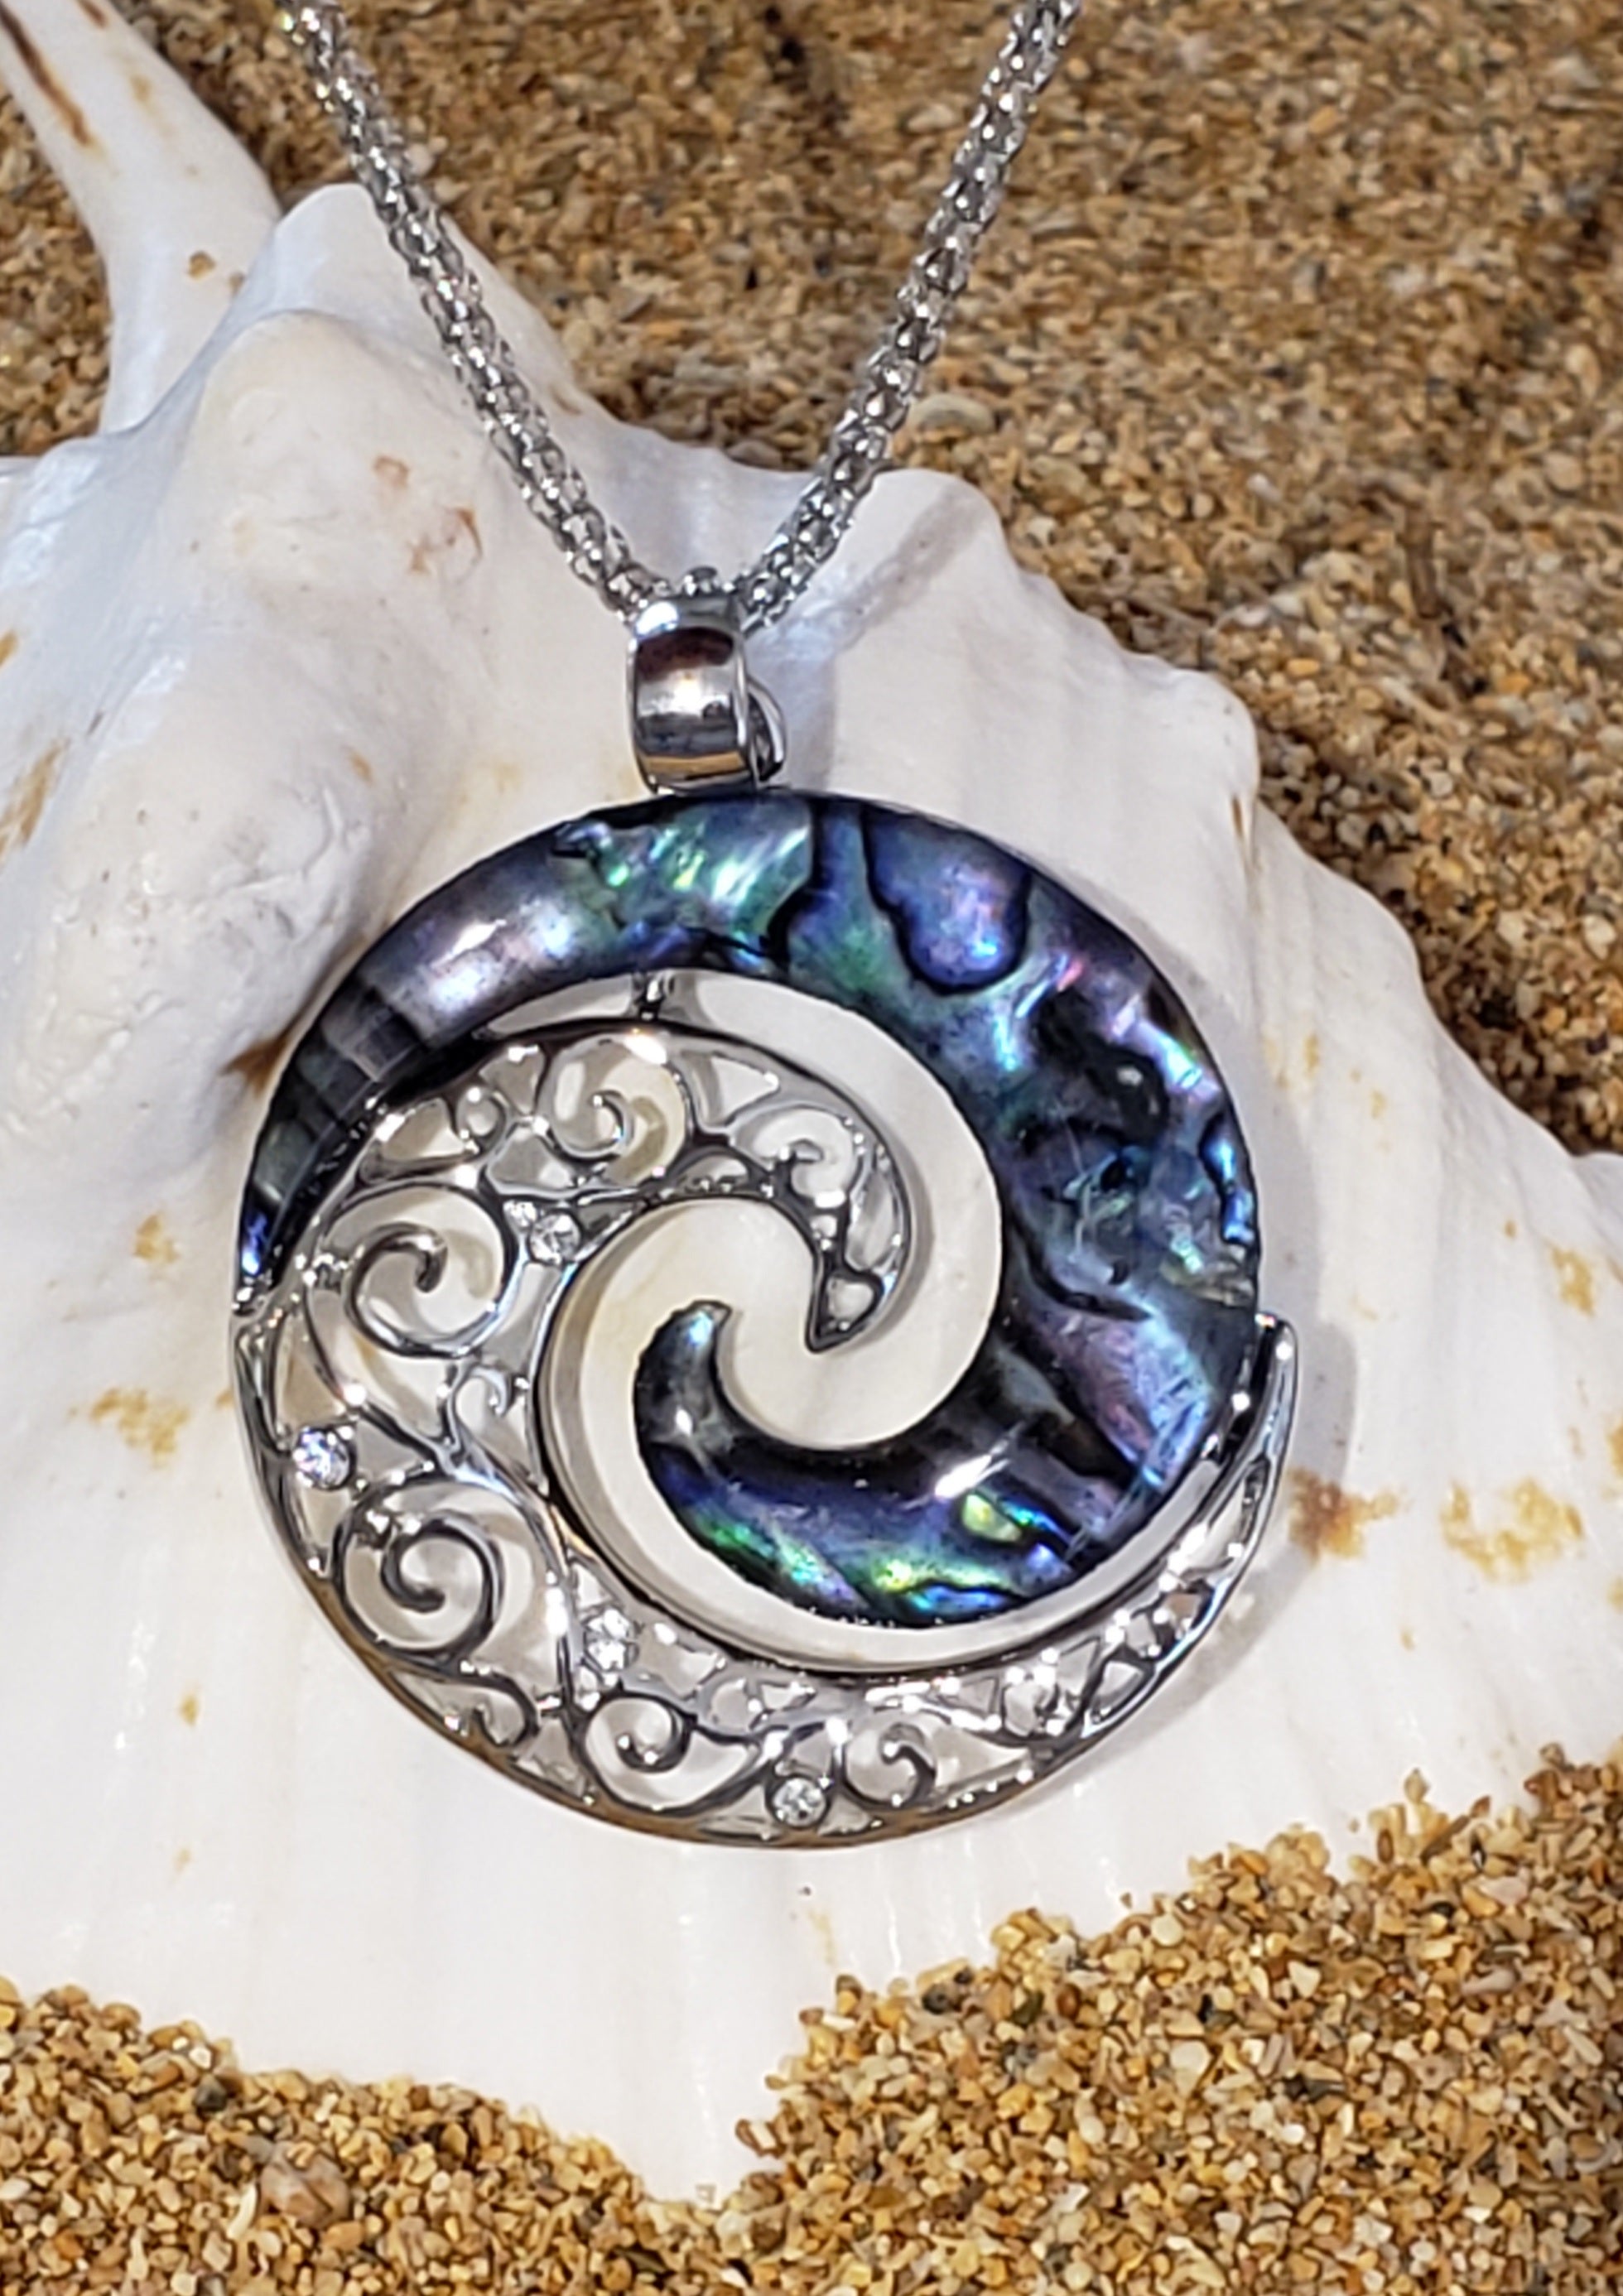 Abalone Shell Double Wave Swirl Stainless Steel pendant 2' long with 18"Chain